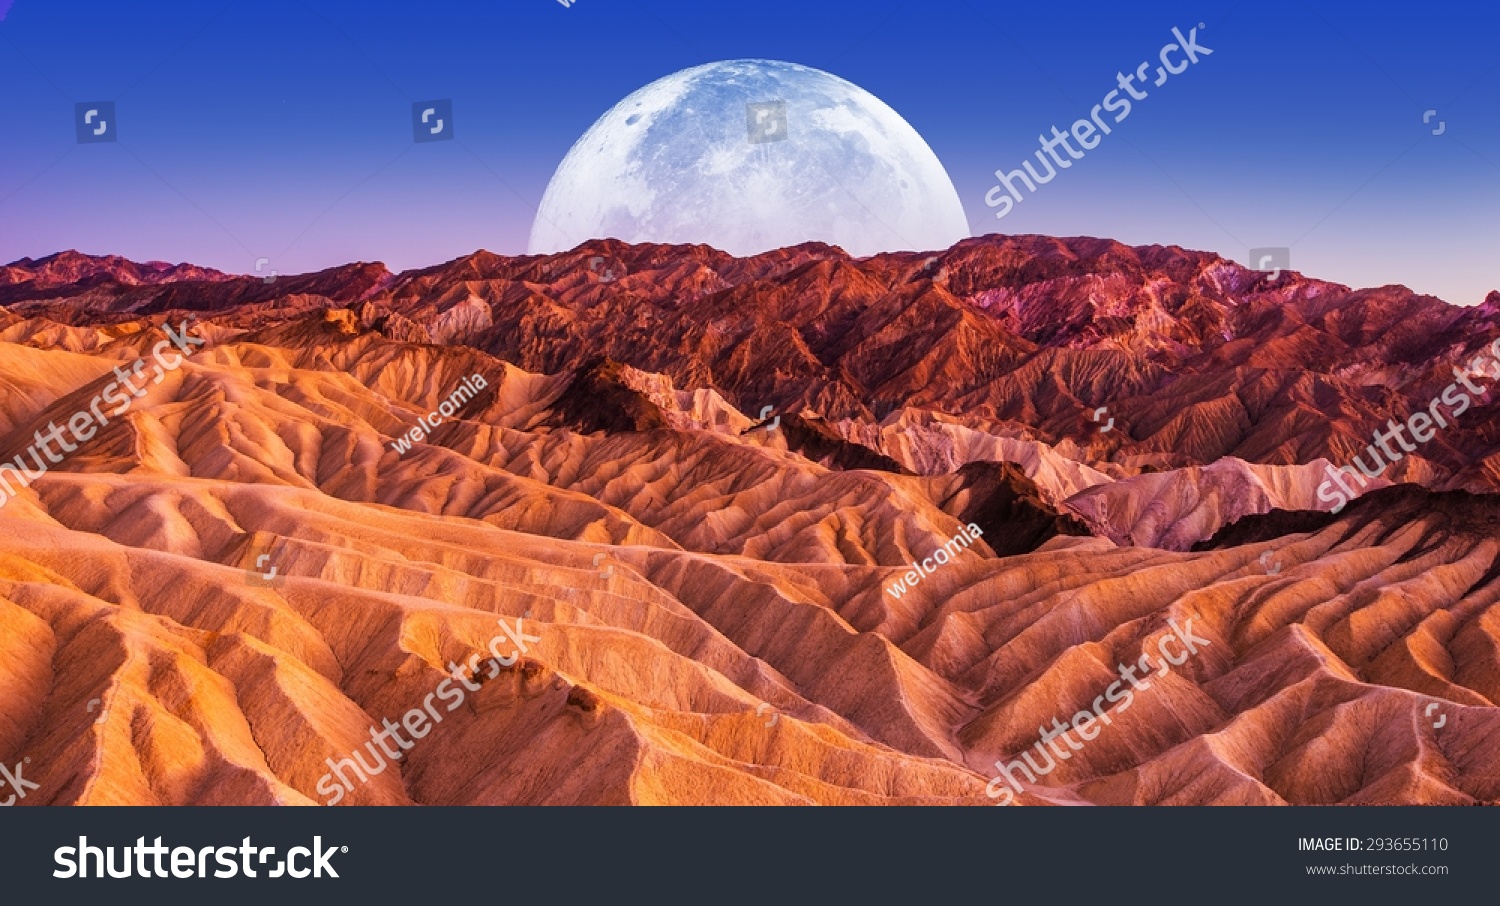 Death Valley Scenic Night. Death Valley National Park Badlands Sandstones Landscape and the Moon. California, United States. #293655110